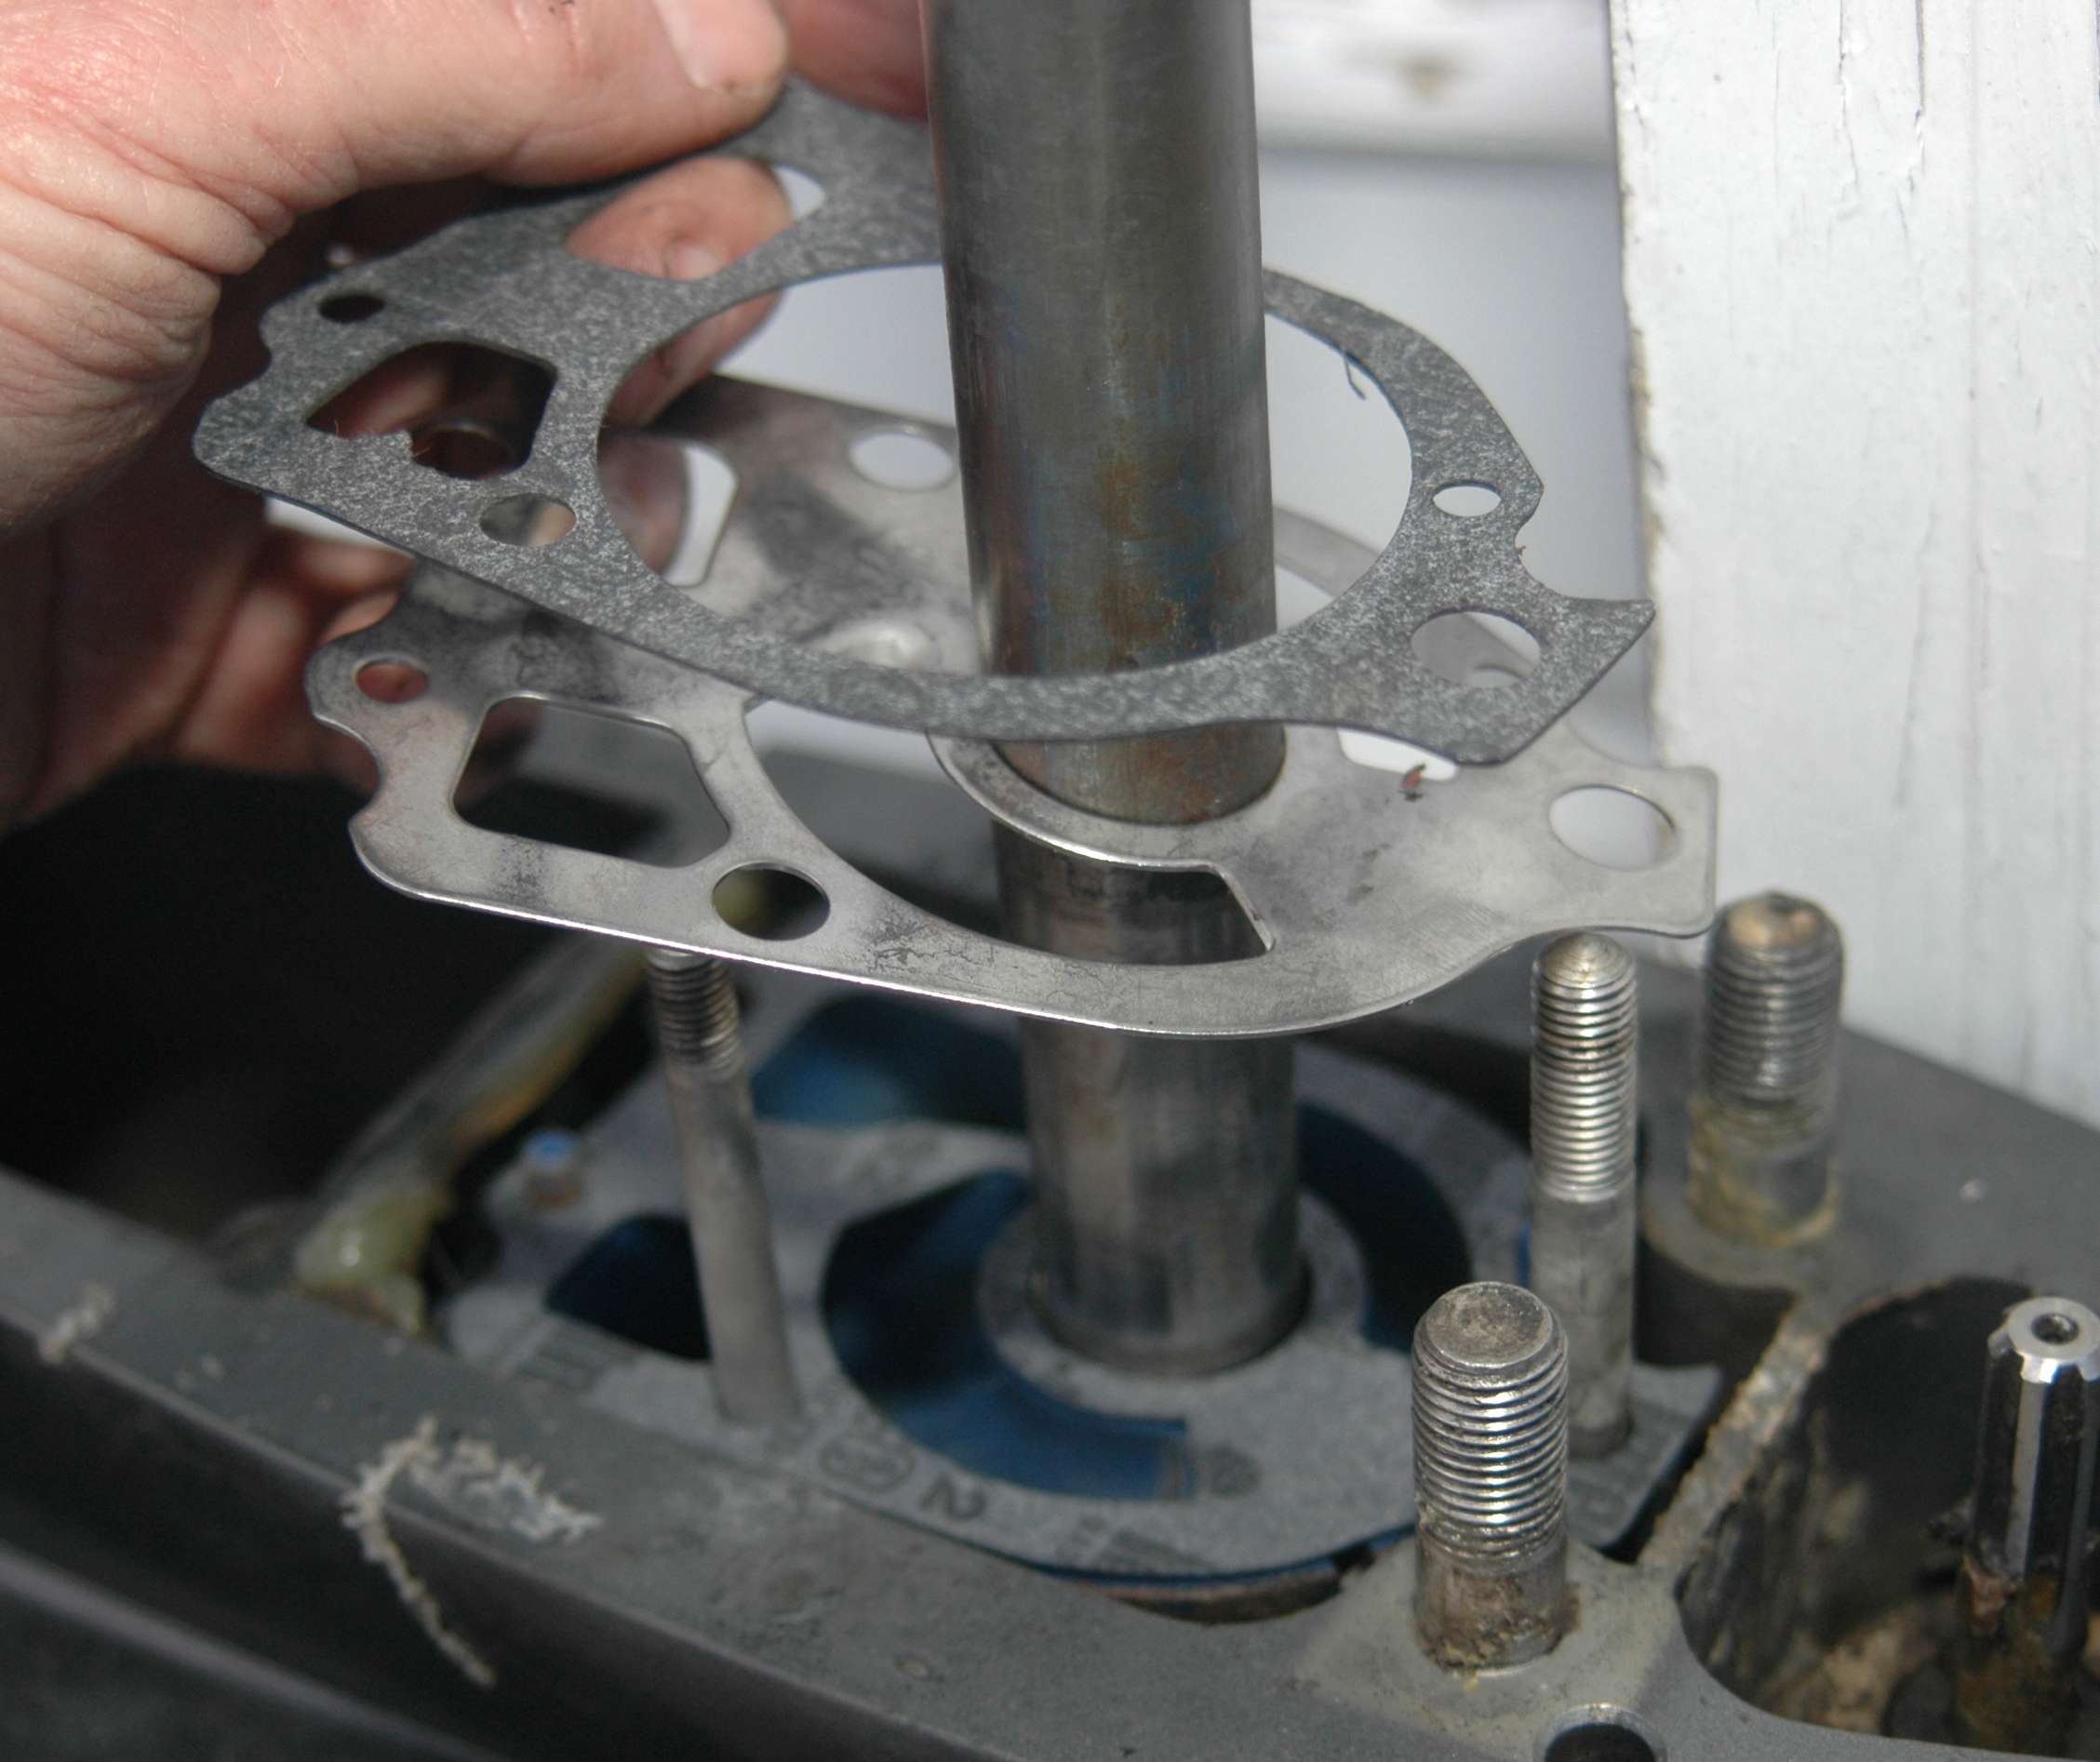 <em>REBUILDING THE WATER PUMP</em>
<br>Remove and replace any gaskets between the water pump housing and its base. I bought a kit at my local marine dealer that had everything I needed. The kit cost only $5 more than the impeller alone.